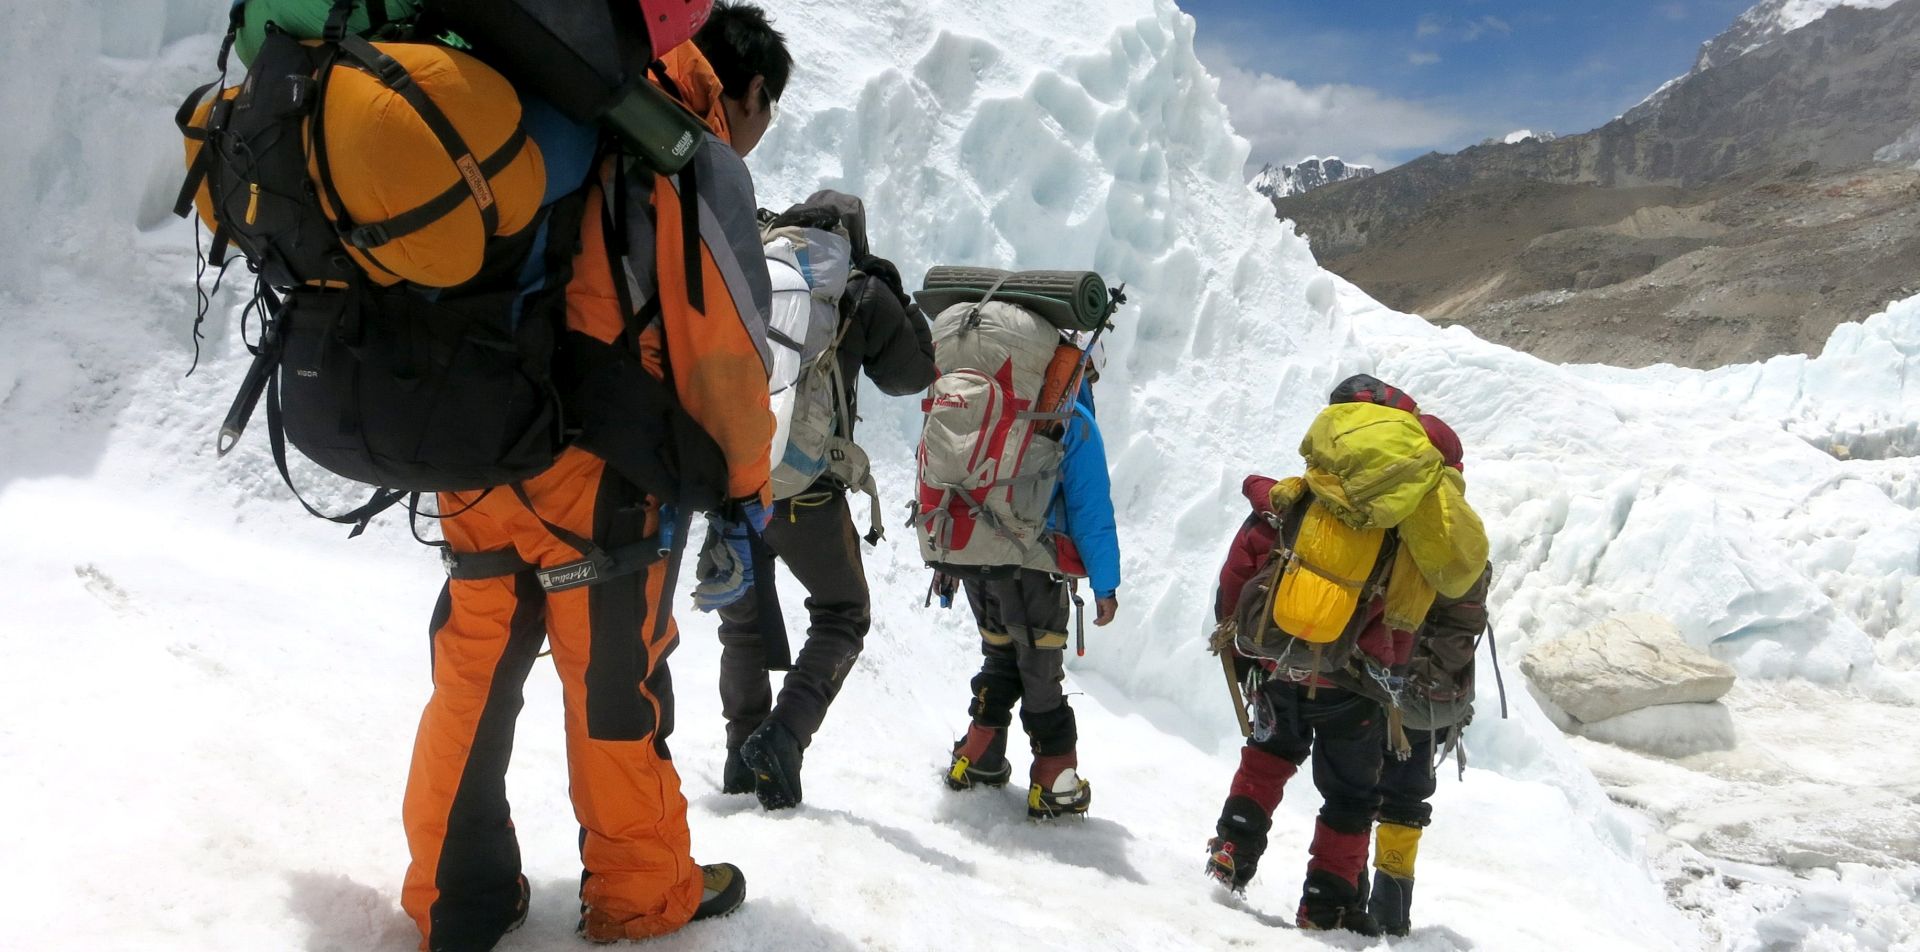 epa05326760 A handout picture provided by Nepalese climber Phurba Tenjing Sherpa shows  climber descending from camp 1 to base camp of Mount Everest, Nepal, 24 May 2016. Dutch climber Eric Arnold, Australian Maria Strydom and Indian climber Subhash Paul died and two other went missing in Everest.  EPA/PHURBA TENJING SHERPA / HANDOUT  HANDOUT EDITORIAL USE ONLY/NO SALES